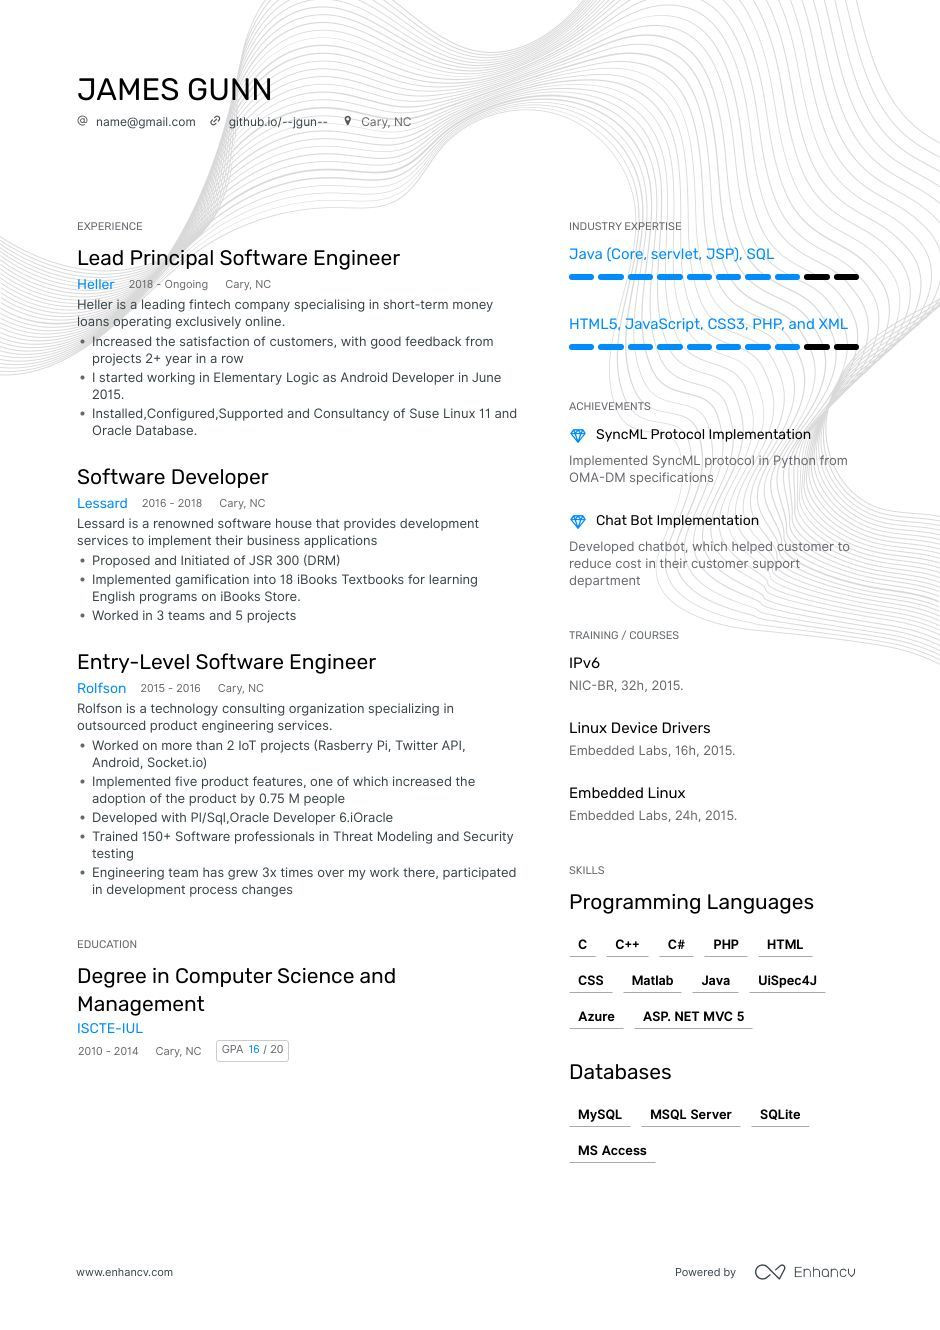 Sample Resume with Ciw Web Development associate software Engineer Resume Examples & Guide for 2022 (layout, Skills …